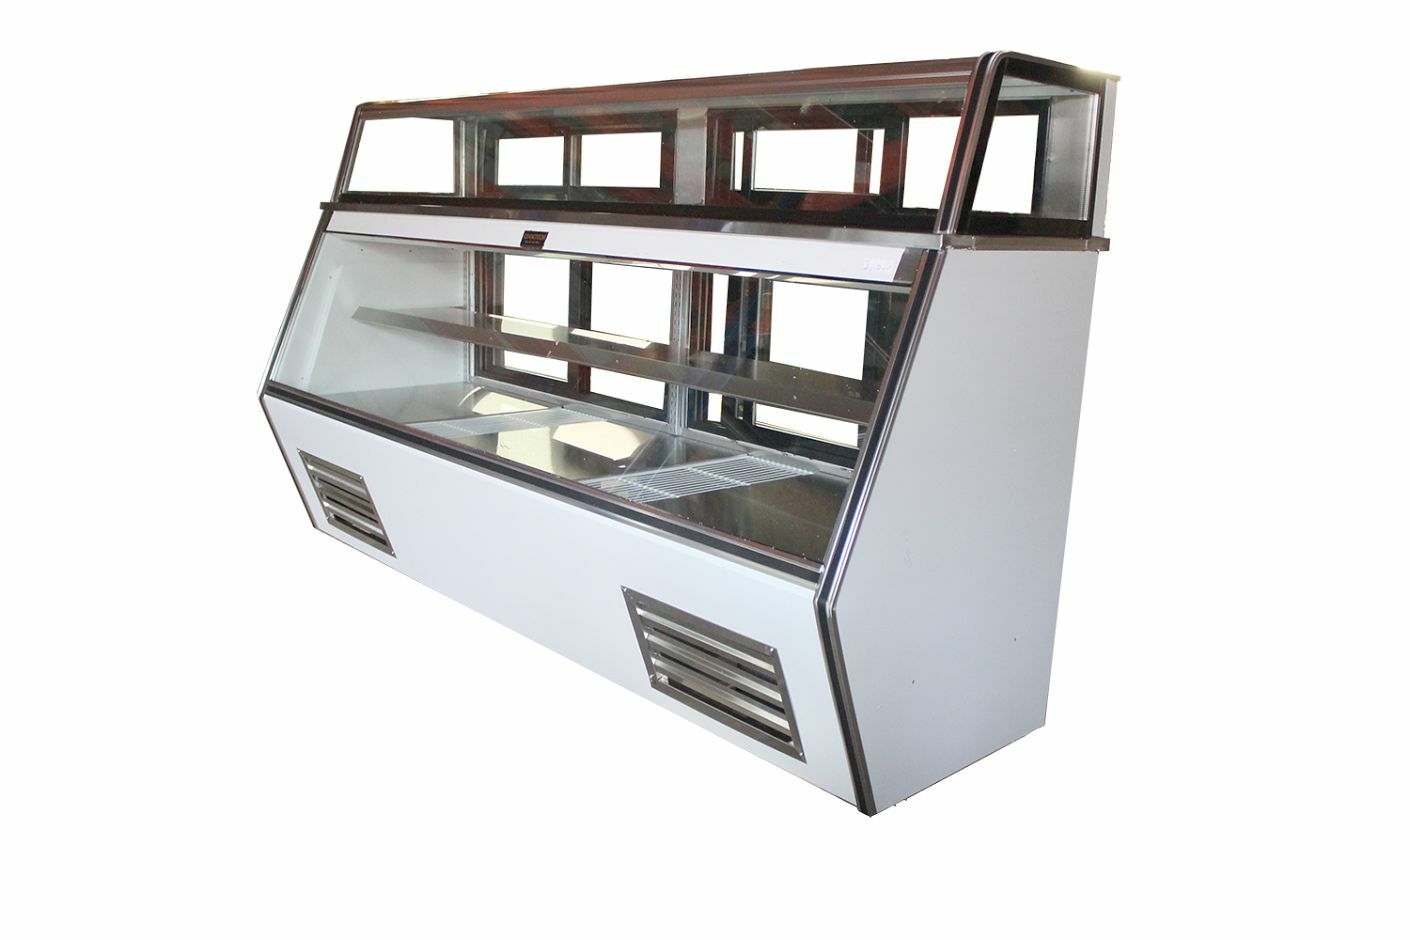 Empty Cooltech Refrigerated 7-11 Style Deli Meat Case 84” with glass windows and sliding doors on a white background.